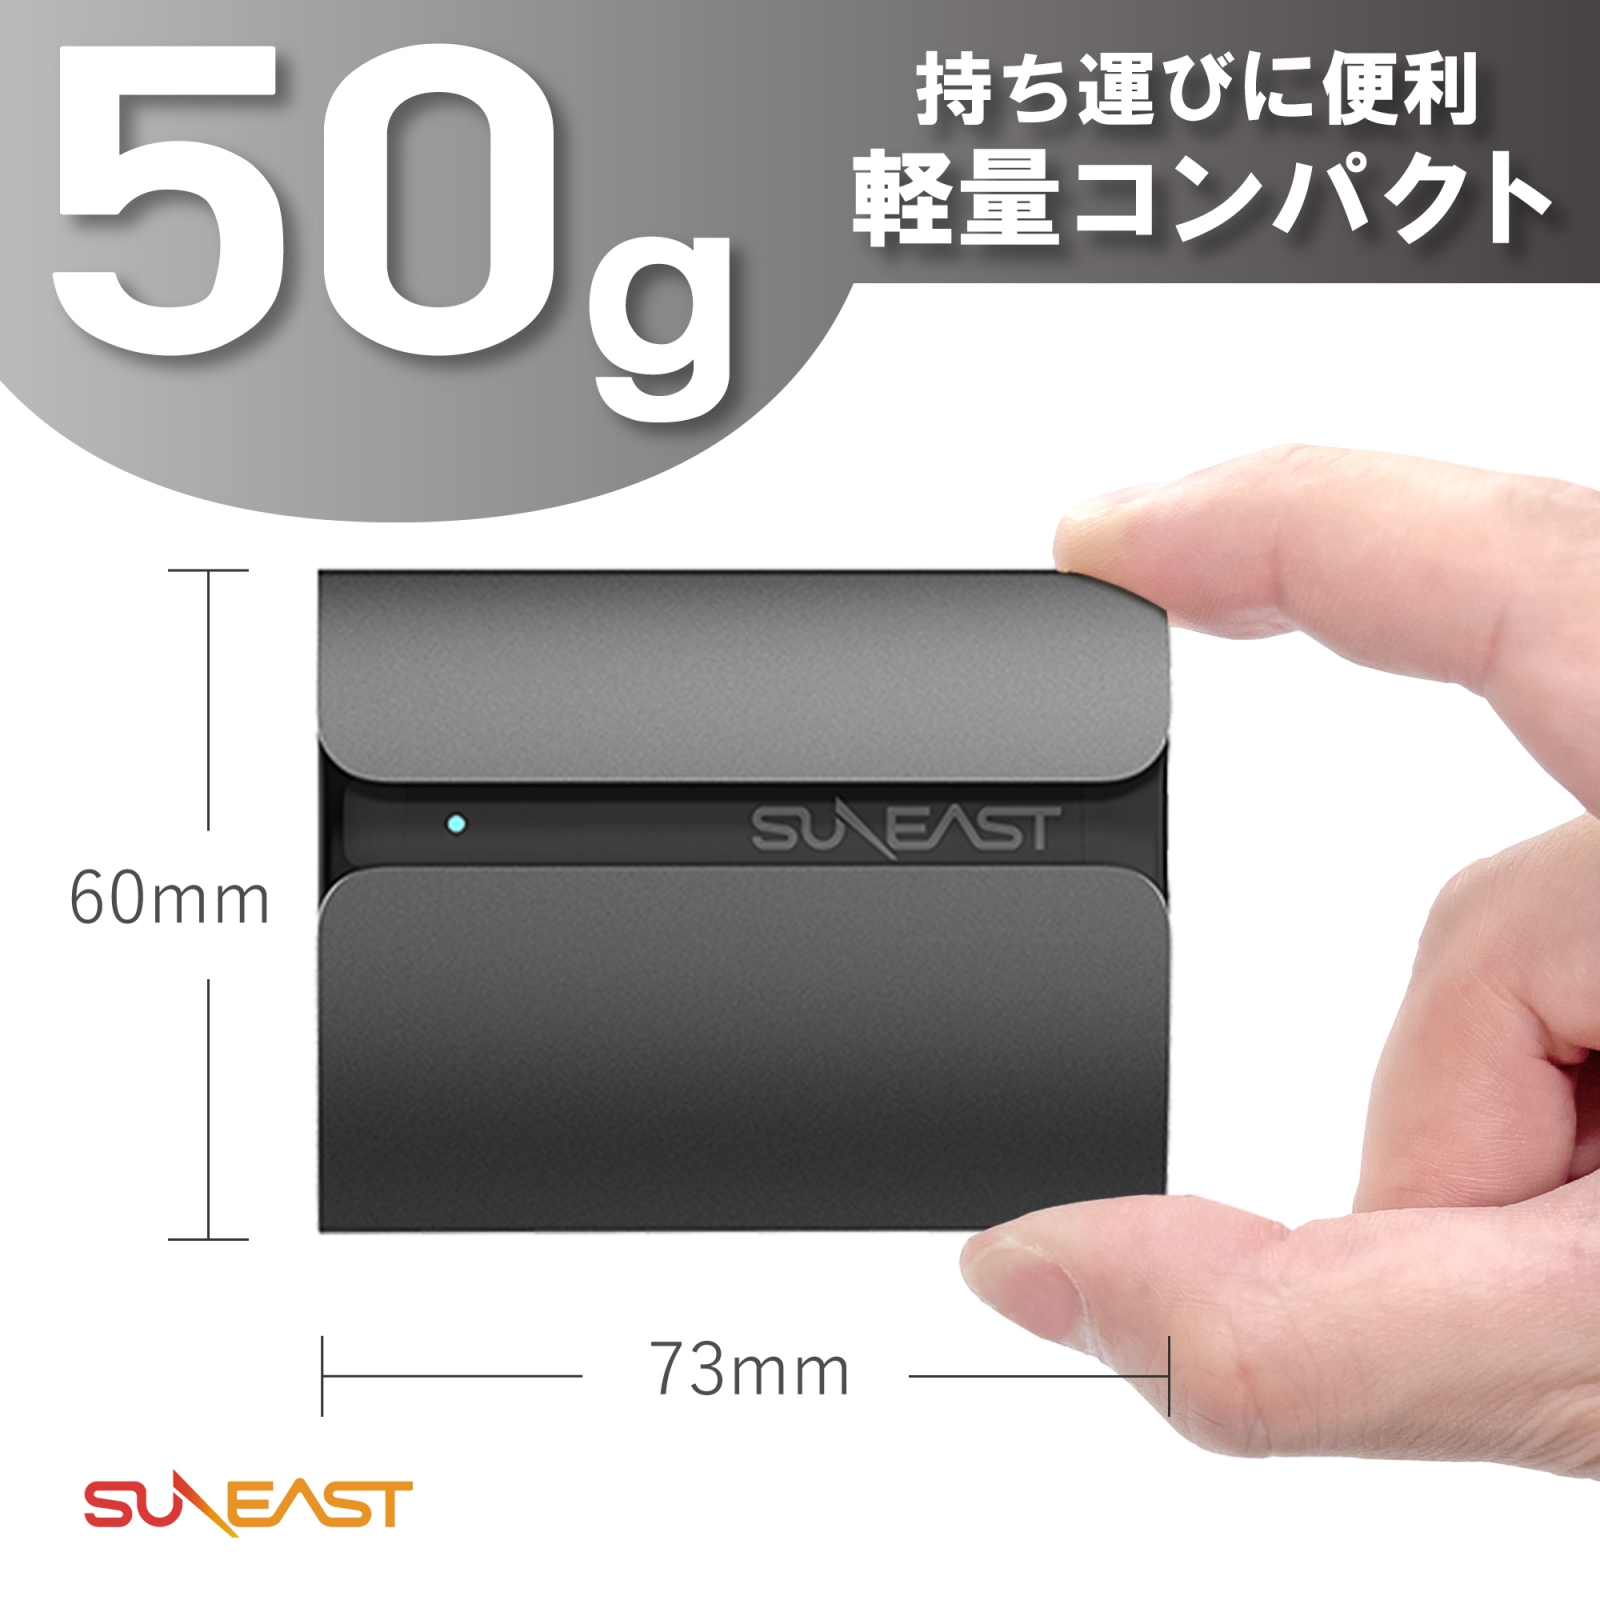 SUNEAST portable SSD 2TB 3 year guarantee USB3.1 Type-C R:560MB/ second USB Type-C conversion adaptor attaching .ssd attached outside 2tb SE-PSSD01AC-02TB